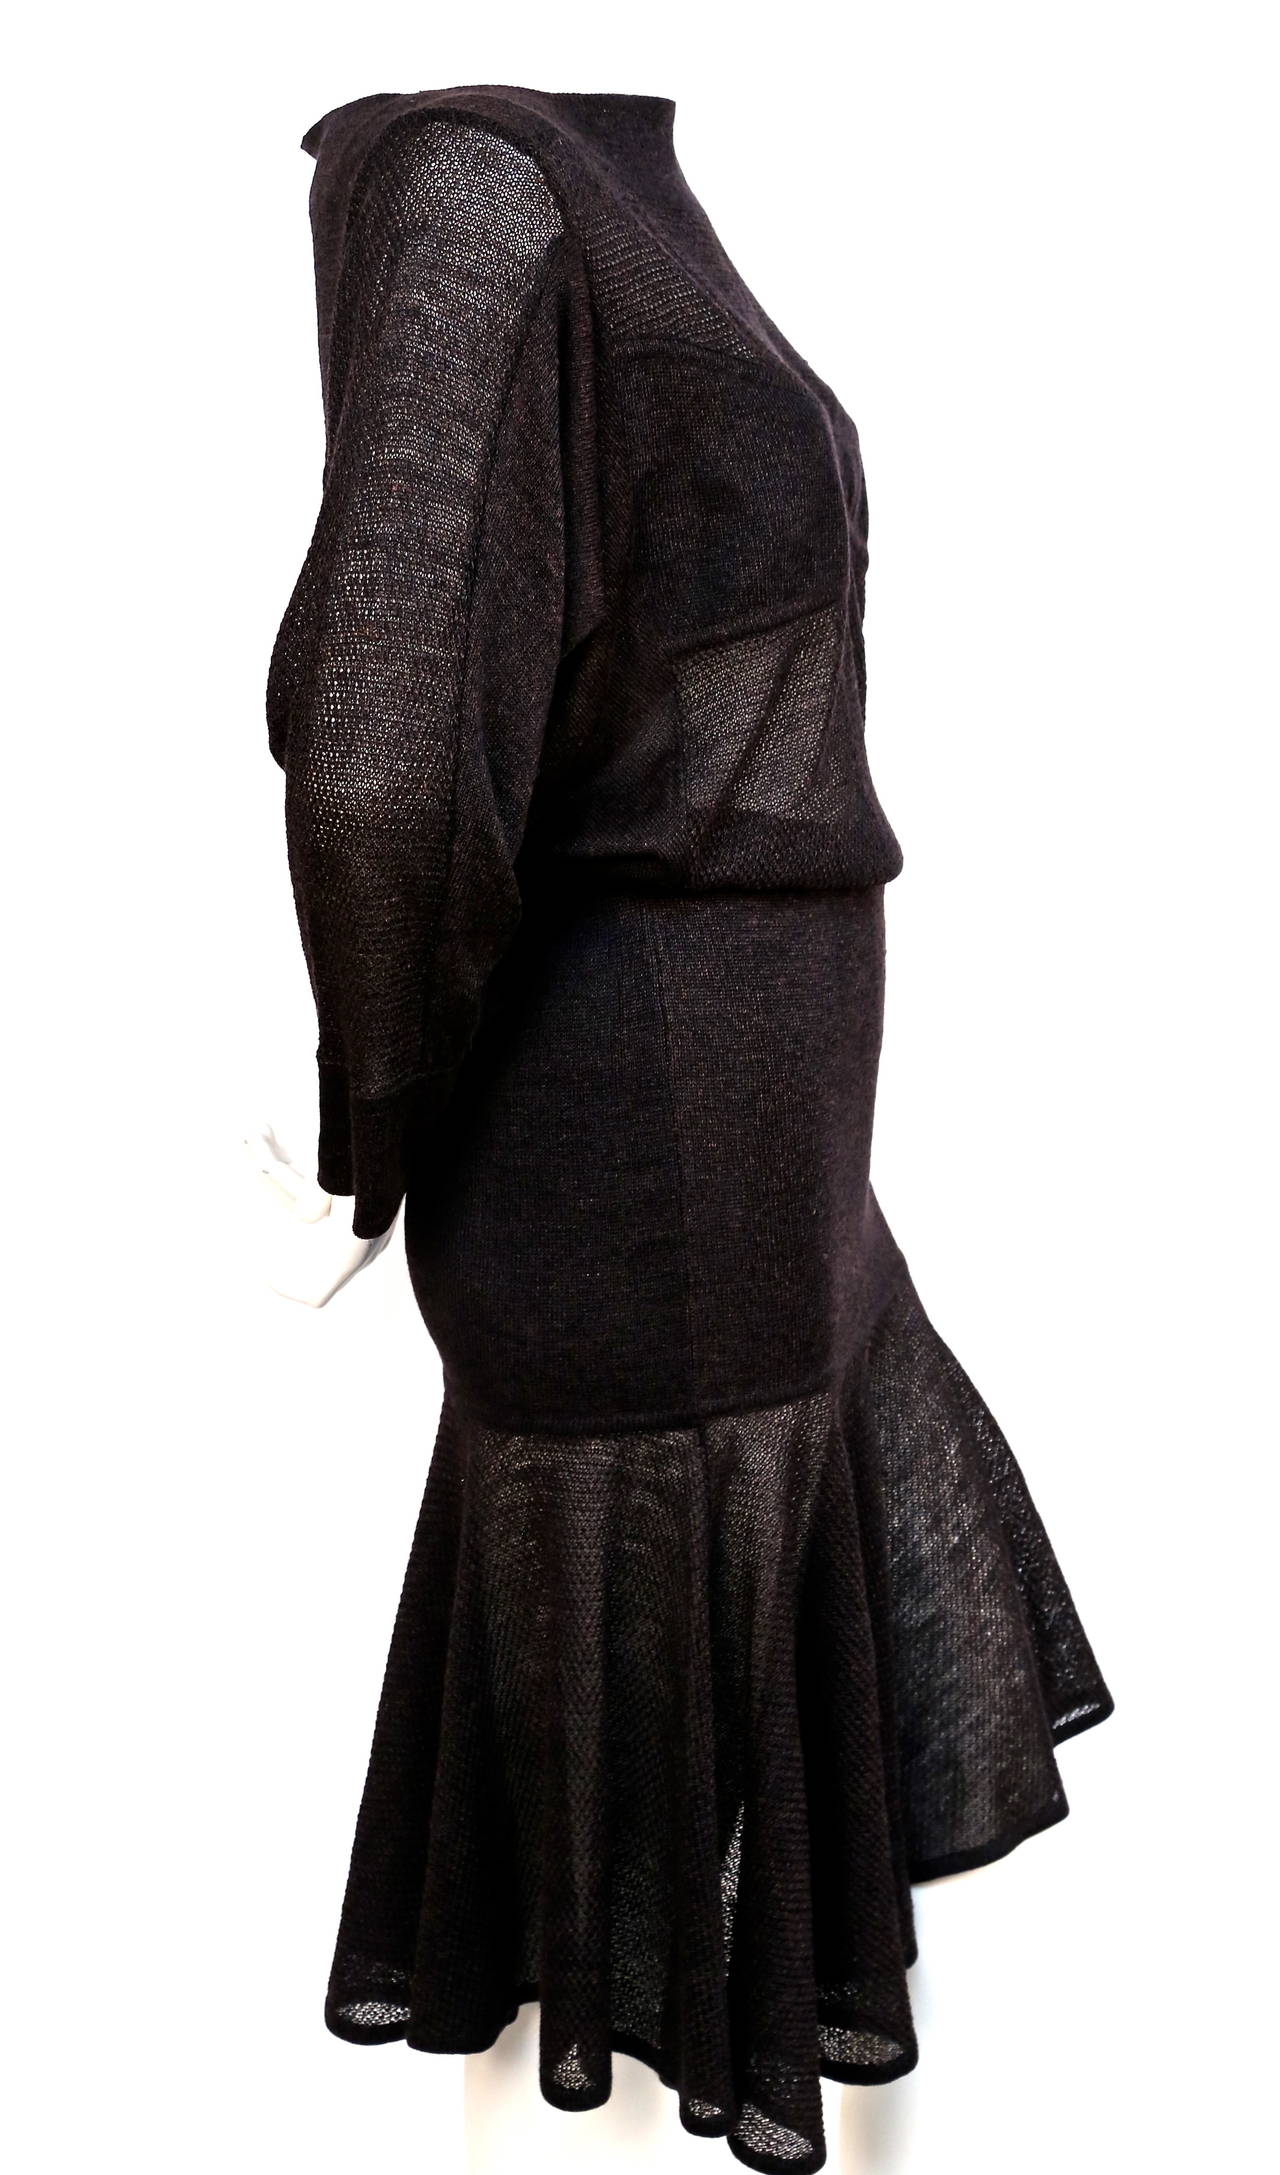 Very rare deep brown knit dress with sheer illusion panels from Azzedine Alaia dating to the 1980's. Size 'S'. Pulls on over the head. Made in Italy. Excellent condition.